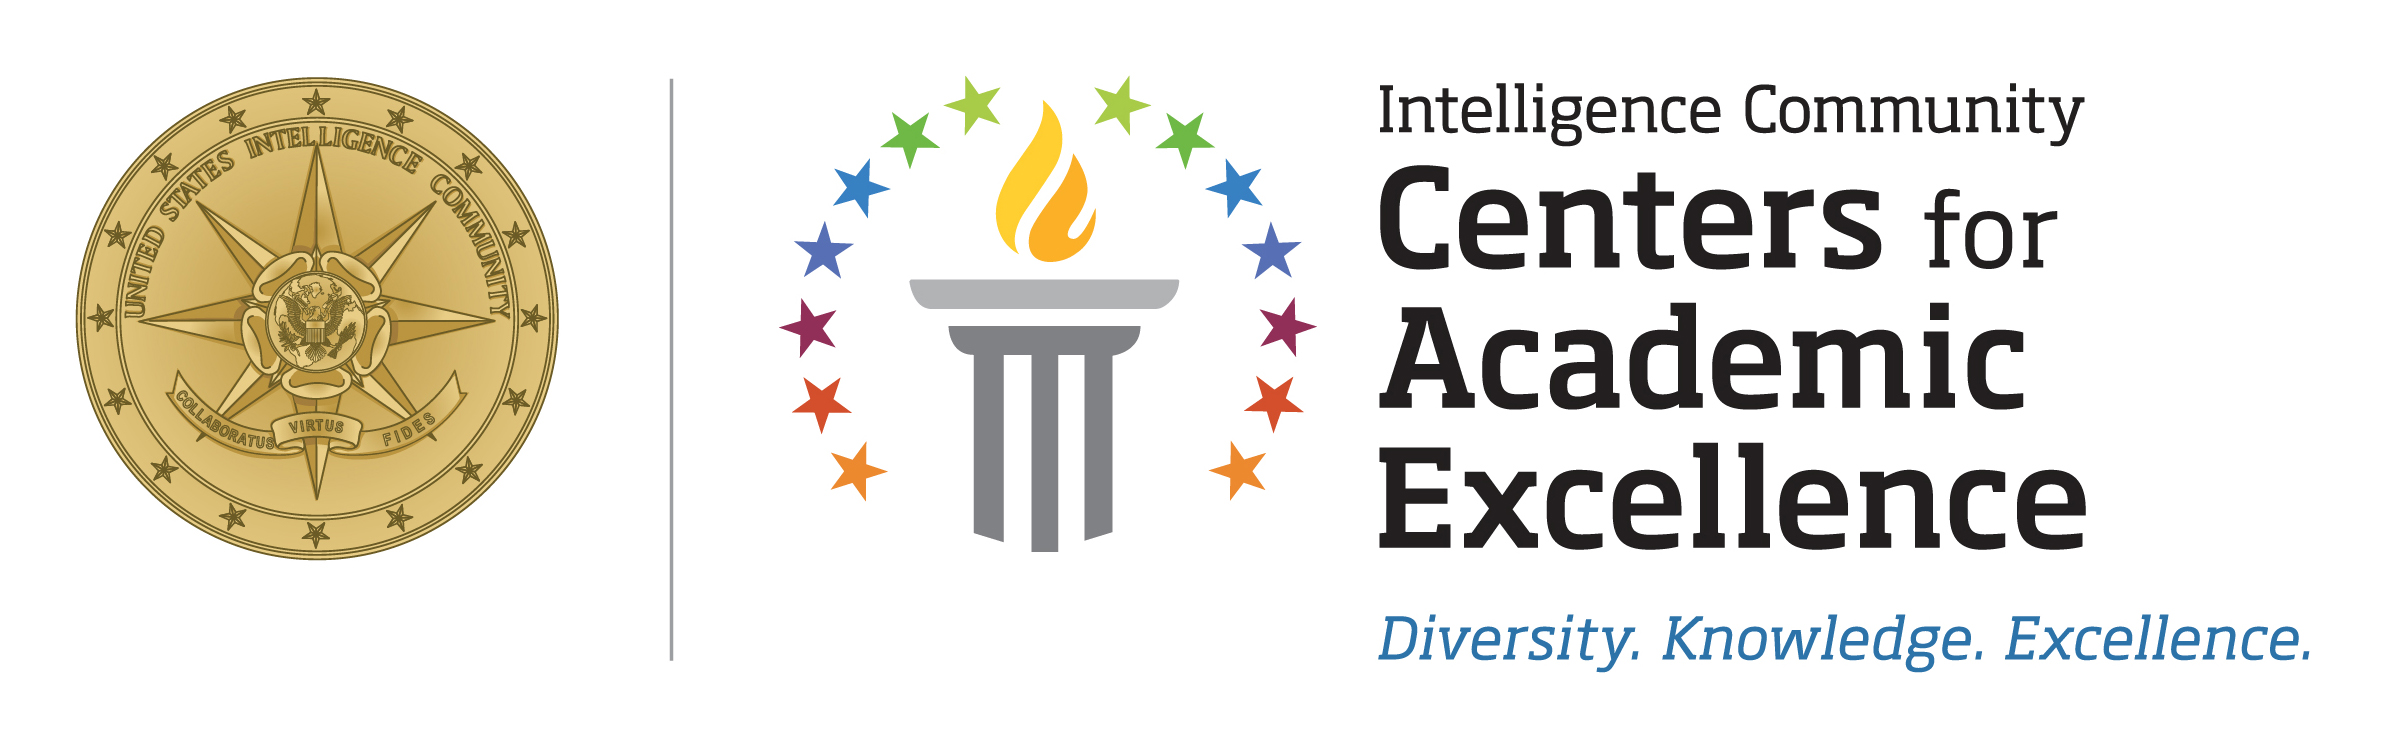 Free ICCAE Bootcamp June 20 gives students a look behind intelligence curtain